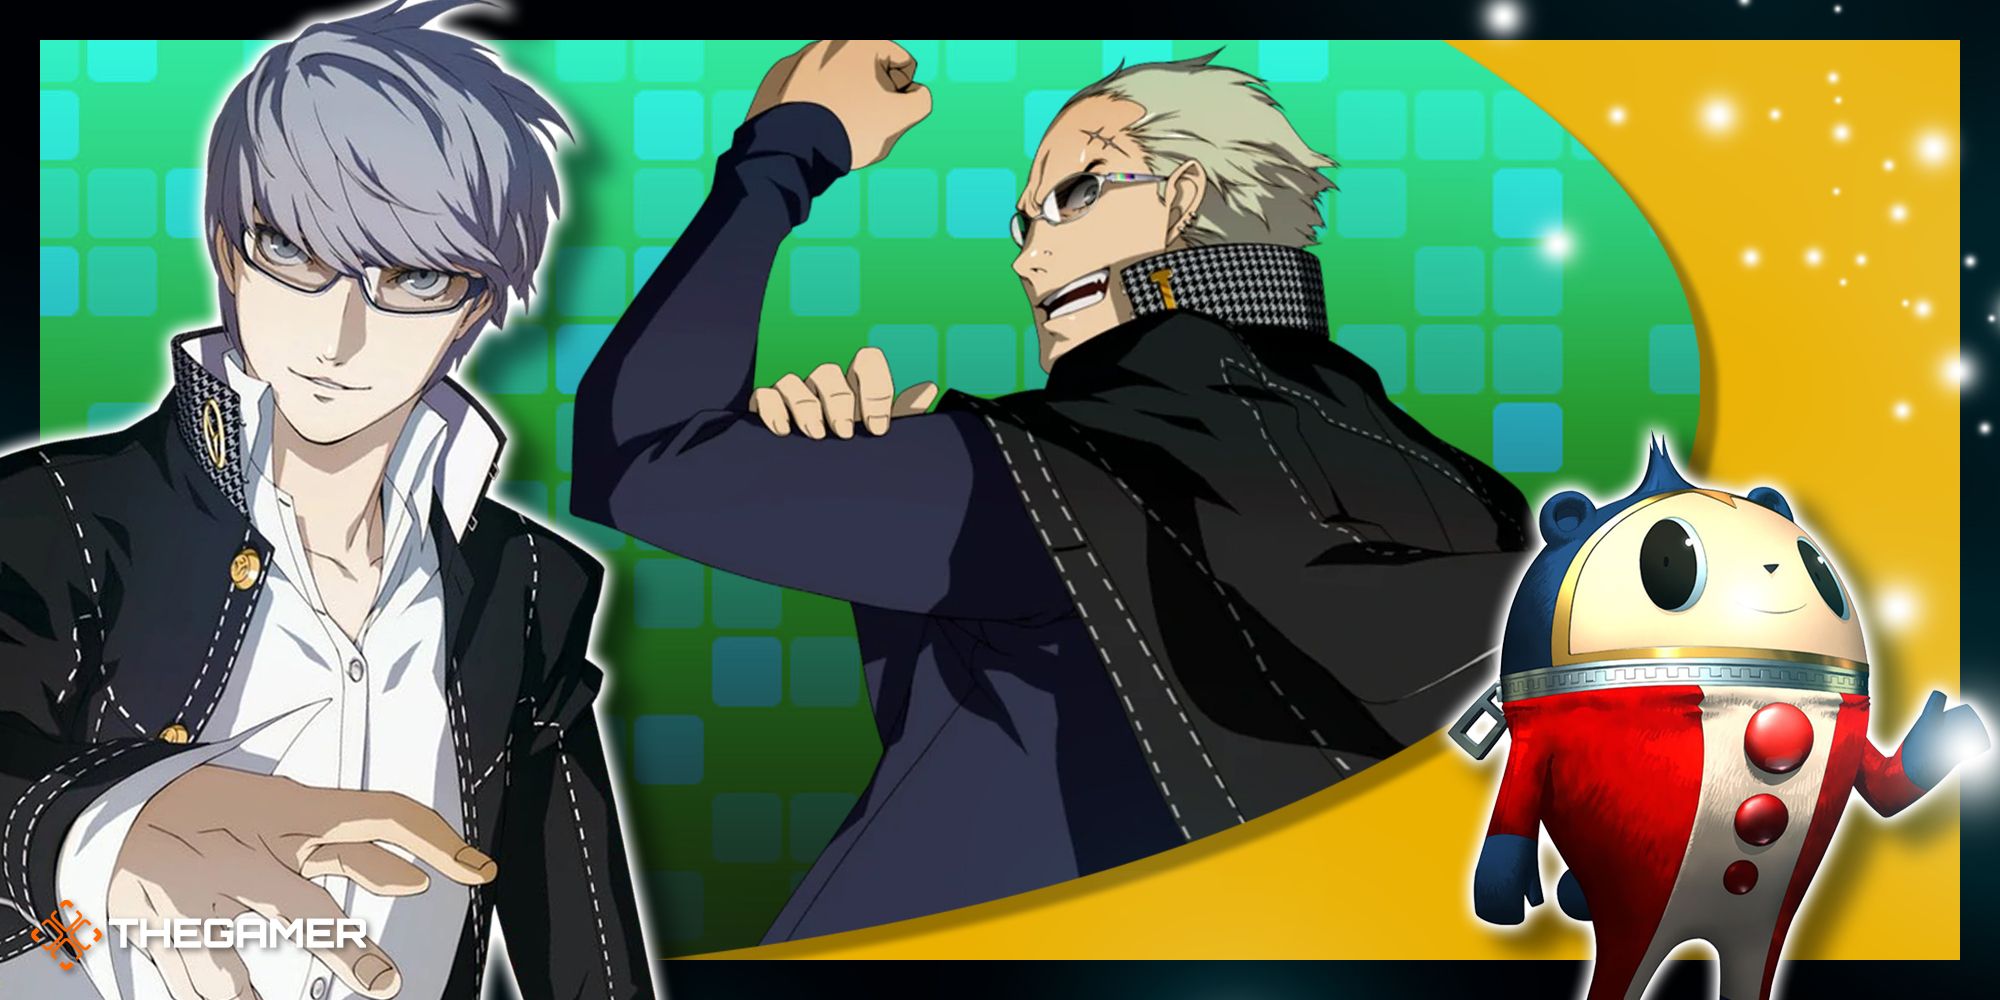 Persona 4 Golden - A collage of Yu, Kanji Tatsumi, and Teddie.